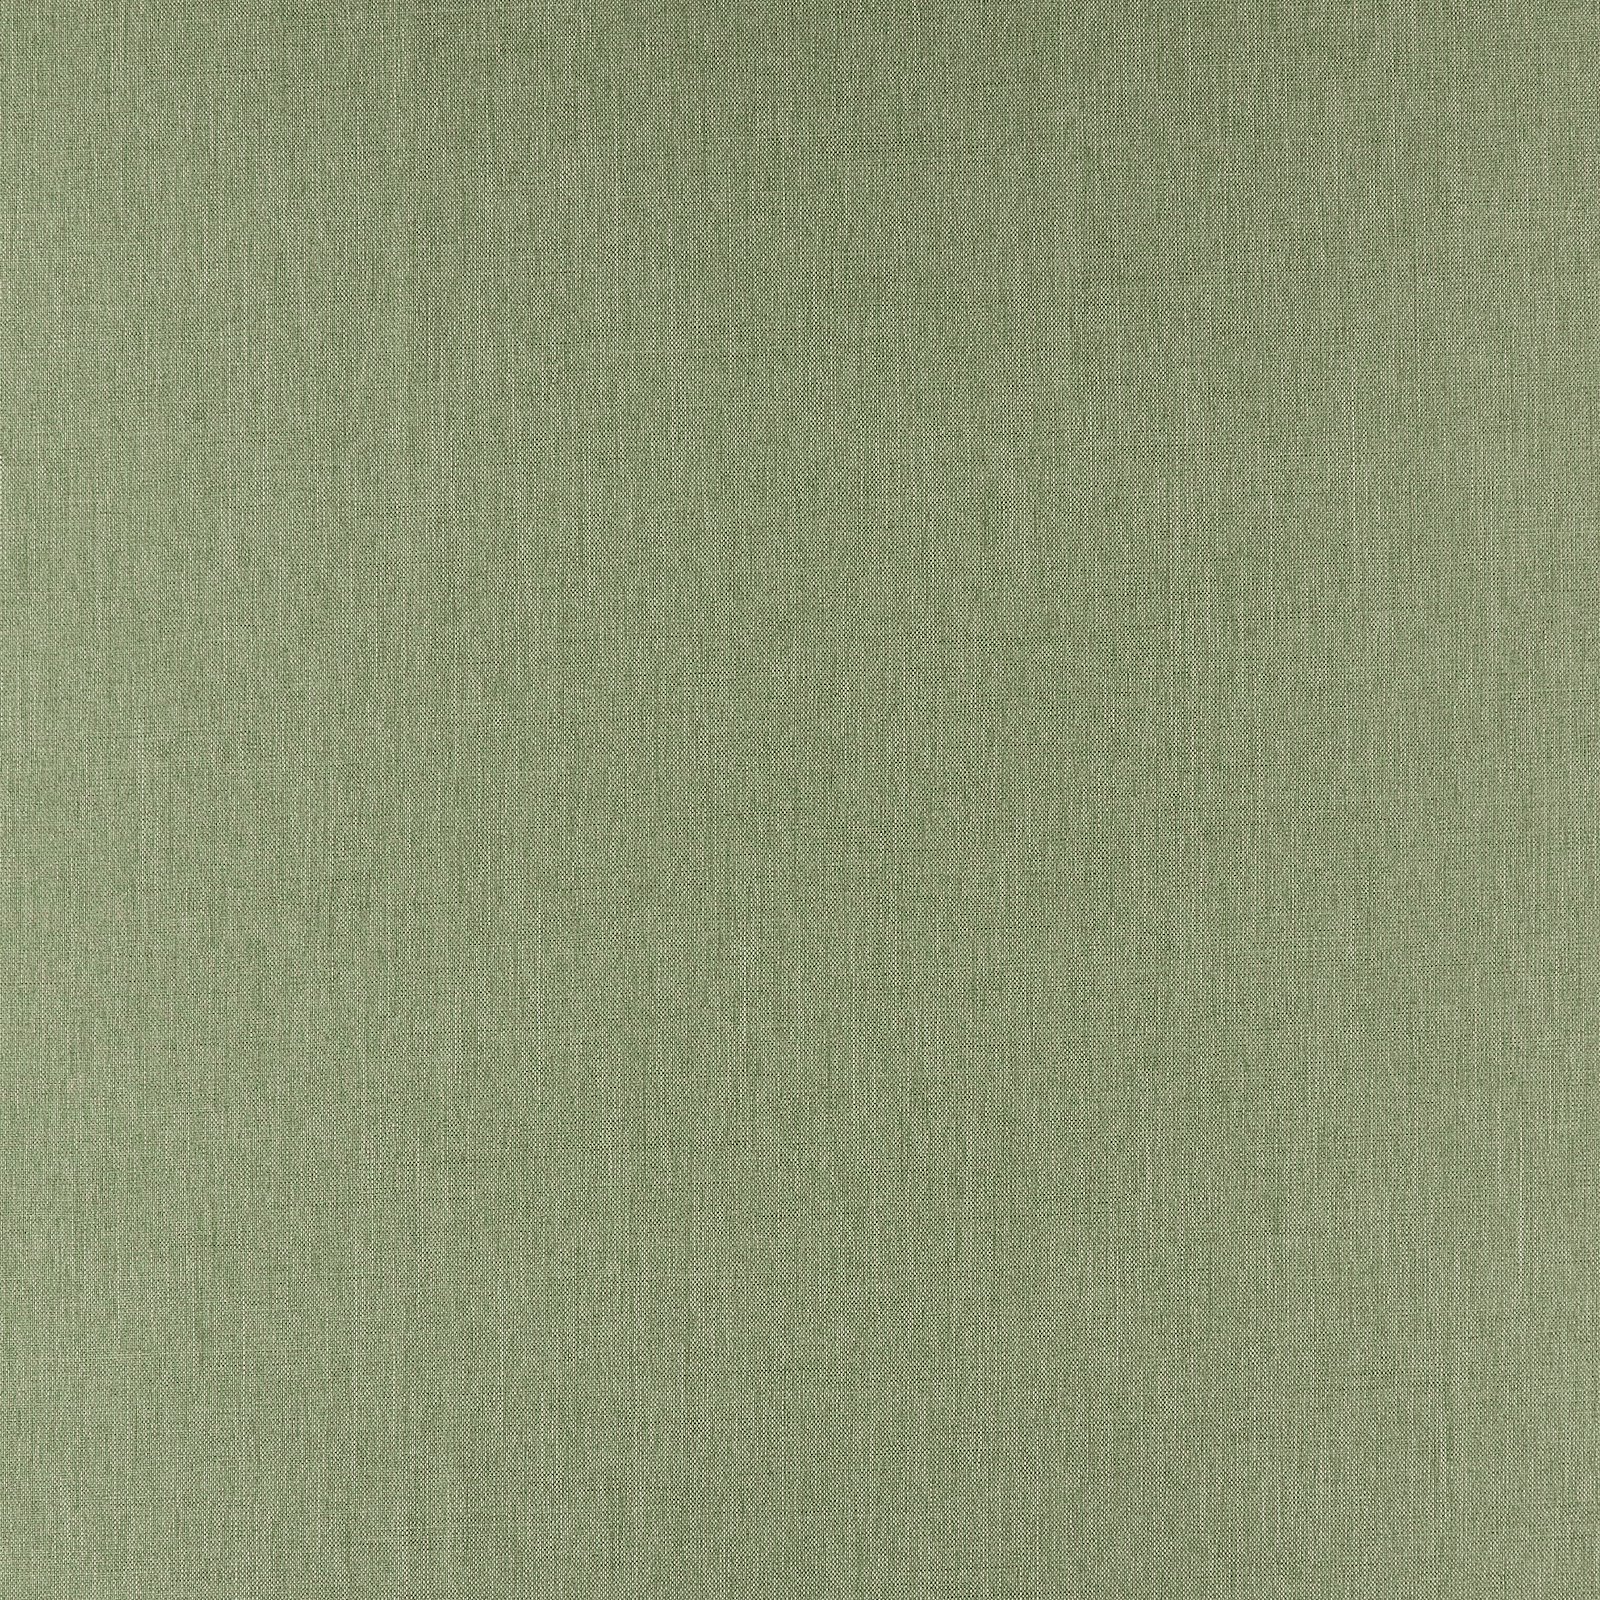 Upholstery fabric bright sage melange 826605_pack_solid